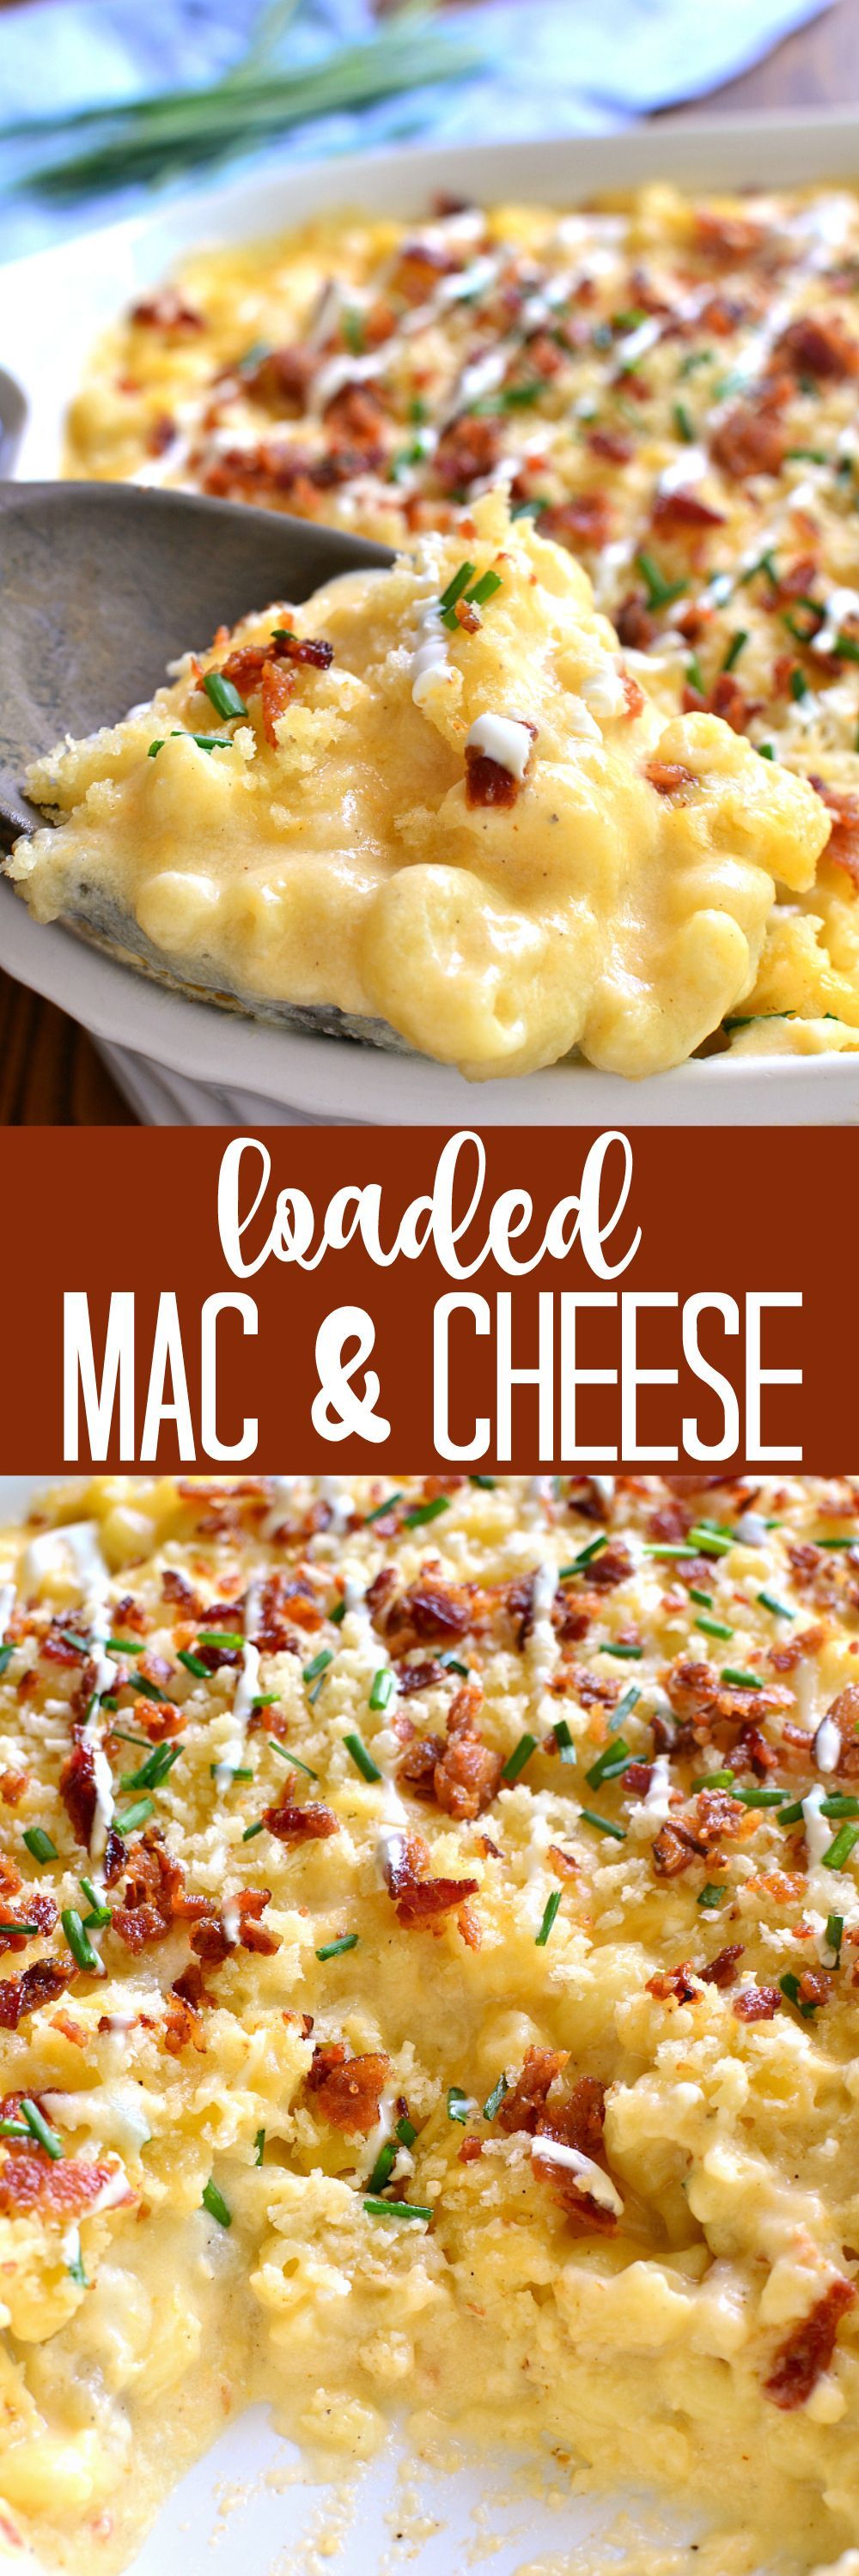 Deliciously creamy Baked Mac & Cheese, loaded with sour cream, bacon, and chiv